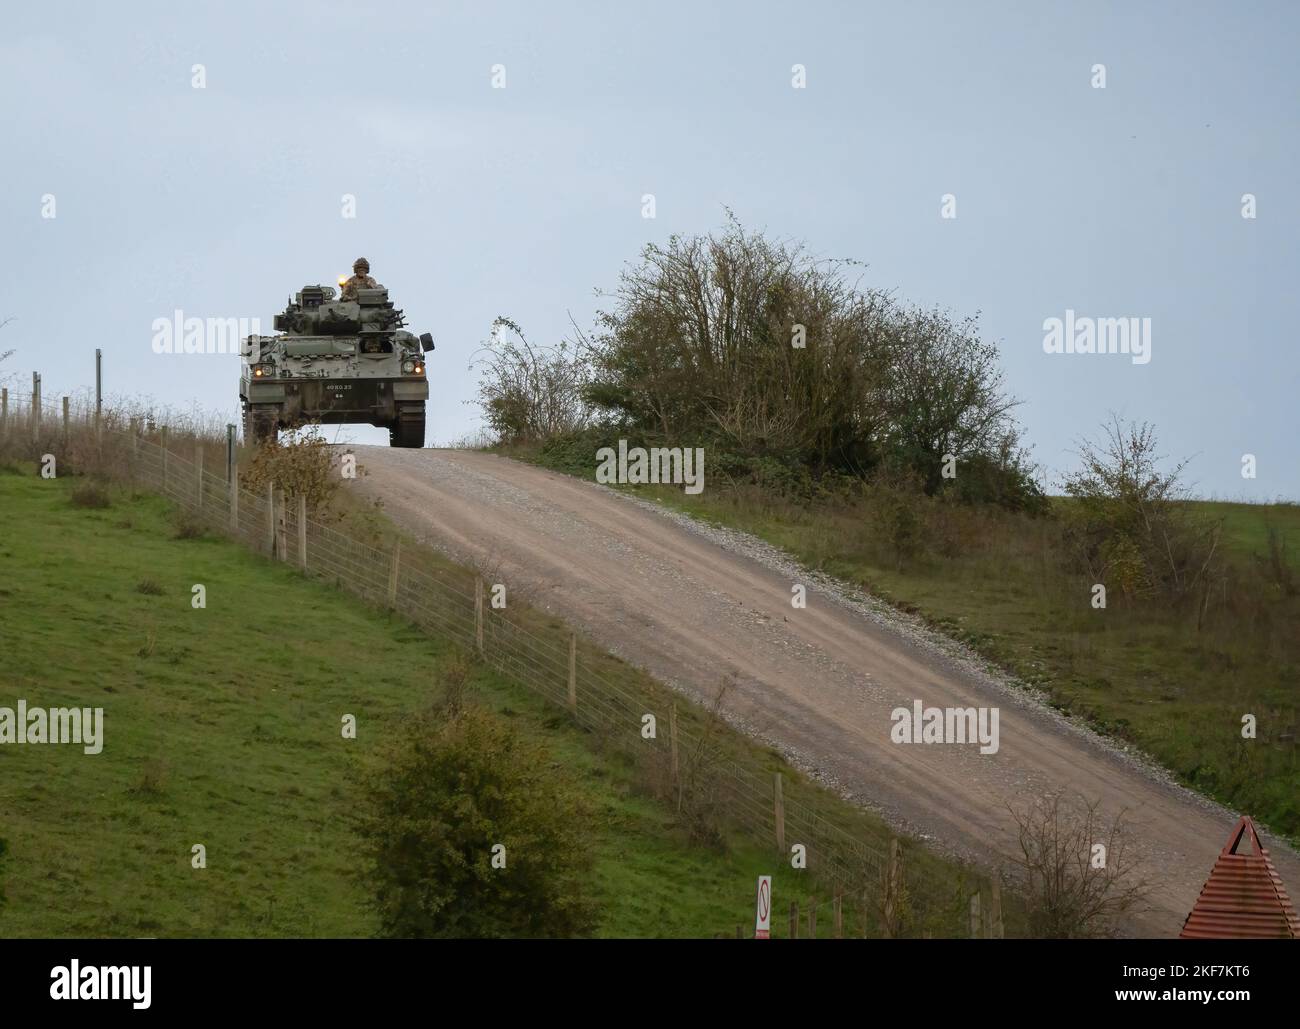 British army Warrior FV510 Fighting Vehicle in action driving on a mud track on a military exercise, Wiltshire UK Stock Photo